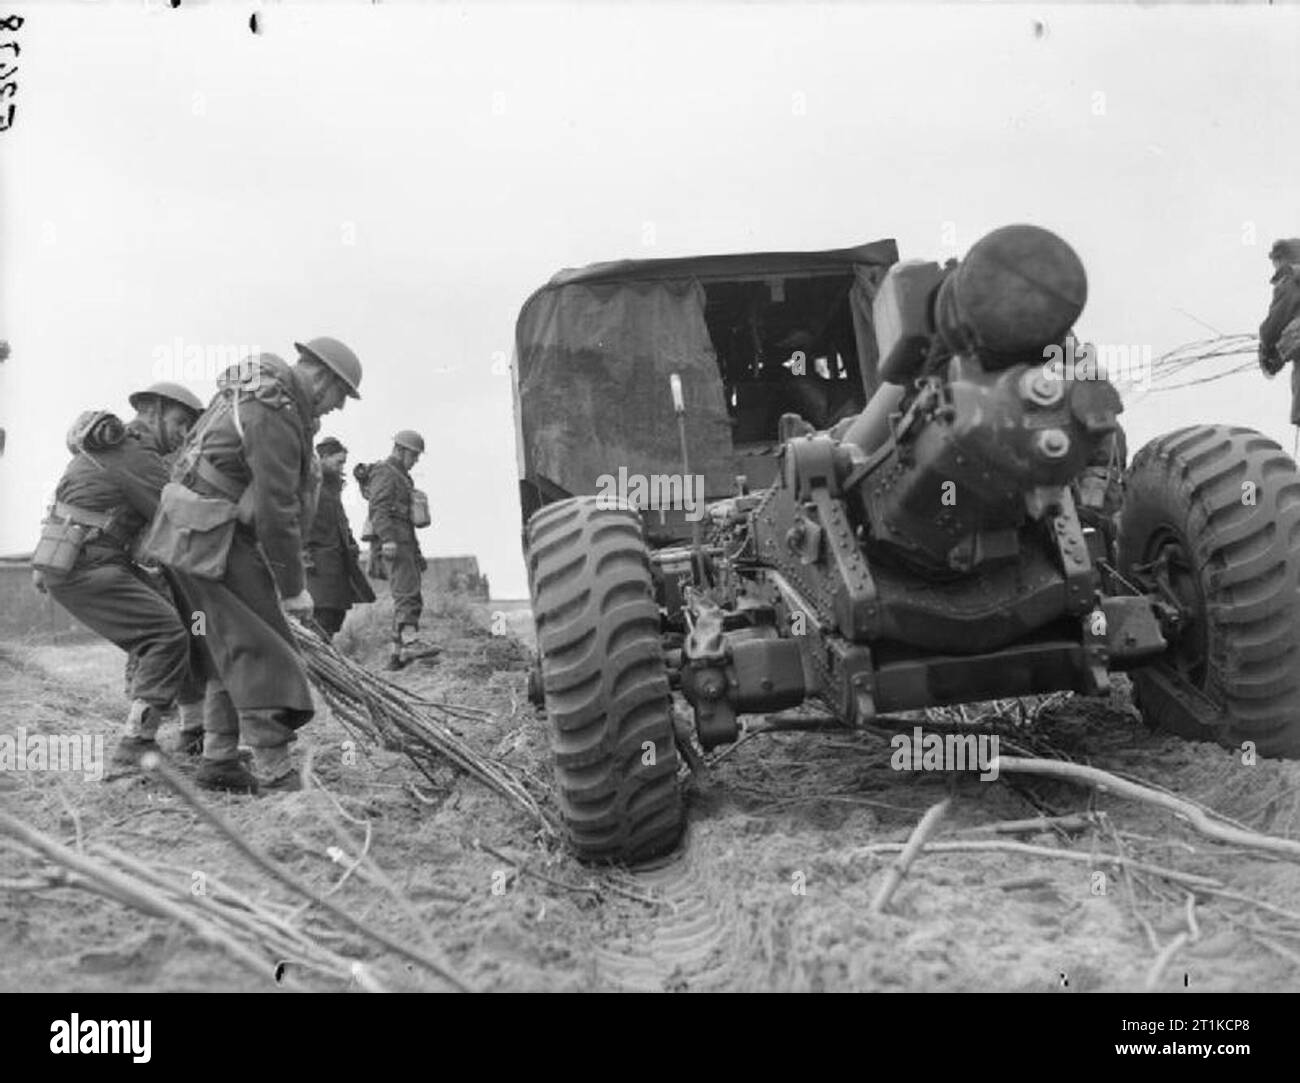 The British Army in France 1940 Gunners of 3rd Medium Regiment, Royal Artillery place brushwood under the wheels of one of their 6-inch howitzers to prevent the wheels sinking into the soft ground as it is towed into position, near Calais, 30 March 1940. Stock Photo